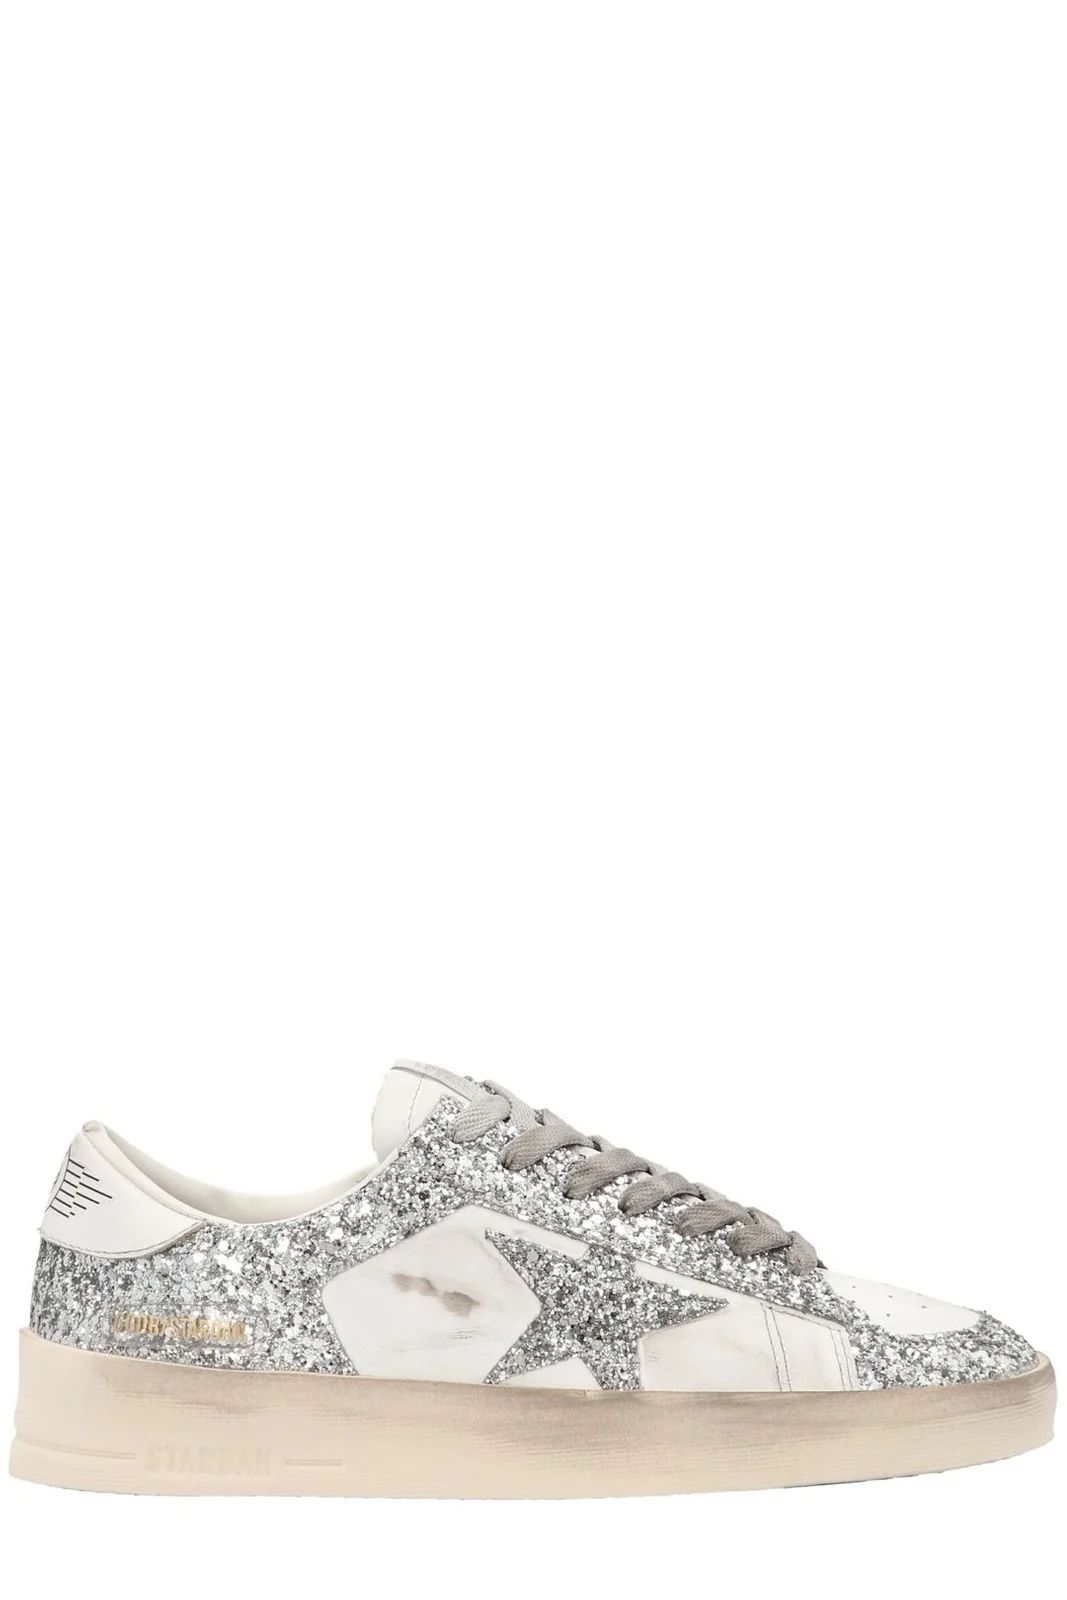 Golden Goose Deluxe Brand Stardan Glitter Lace-Up Sneakers | Cettire Global